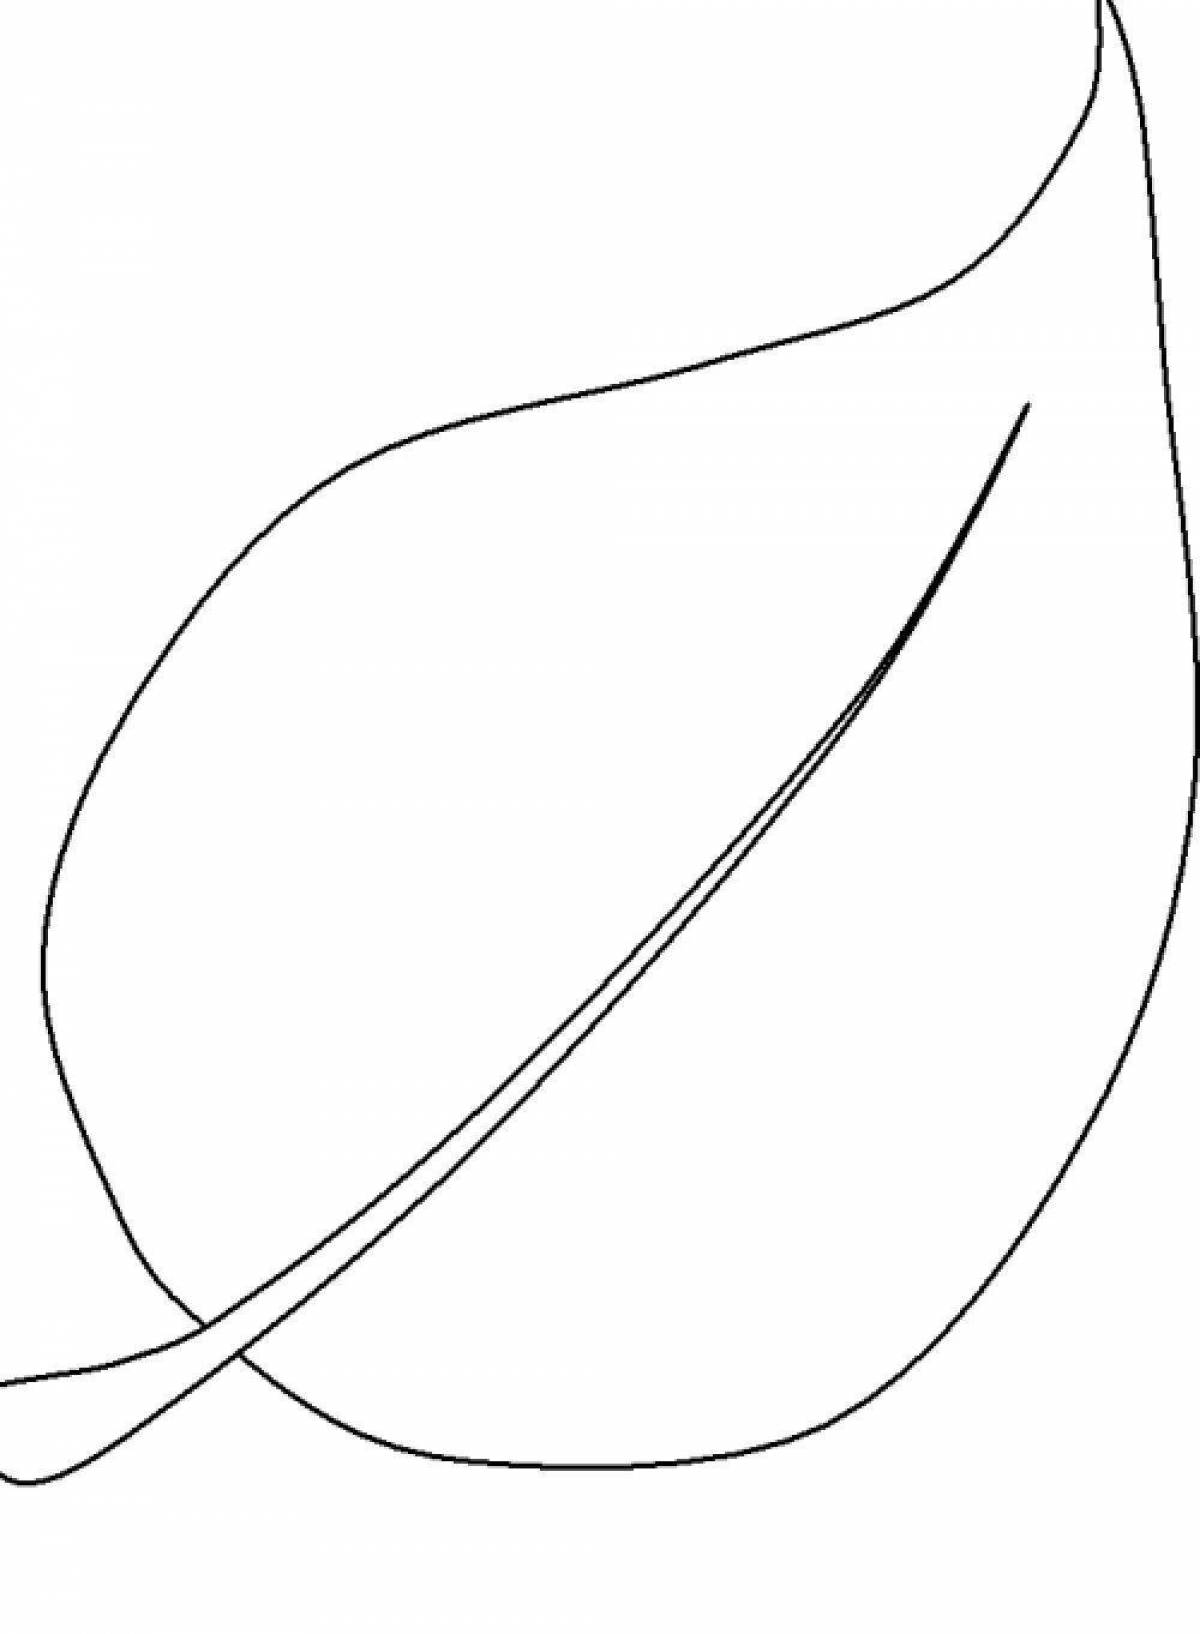 Coloring page wild pattern of petals